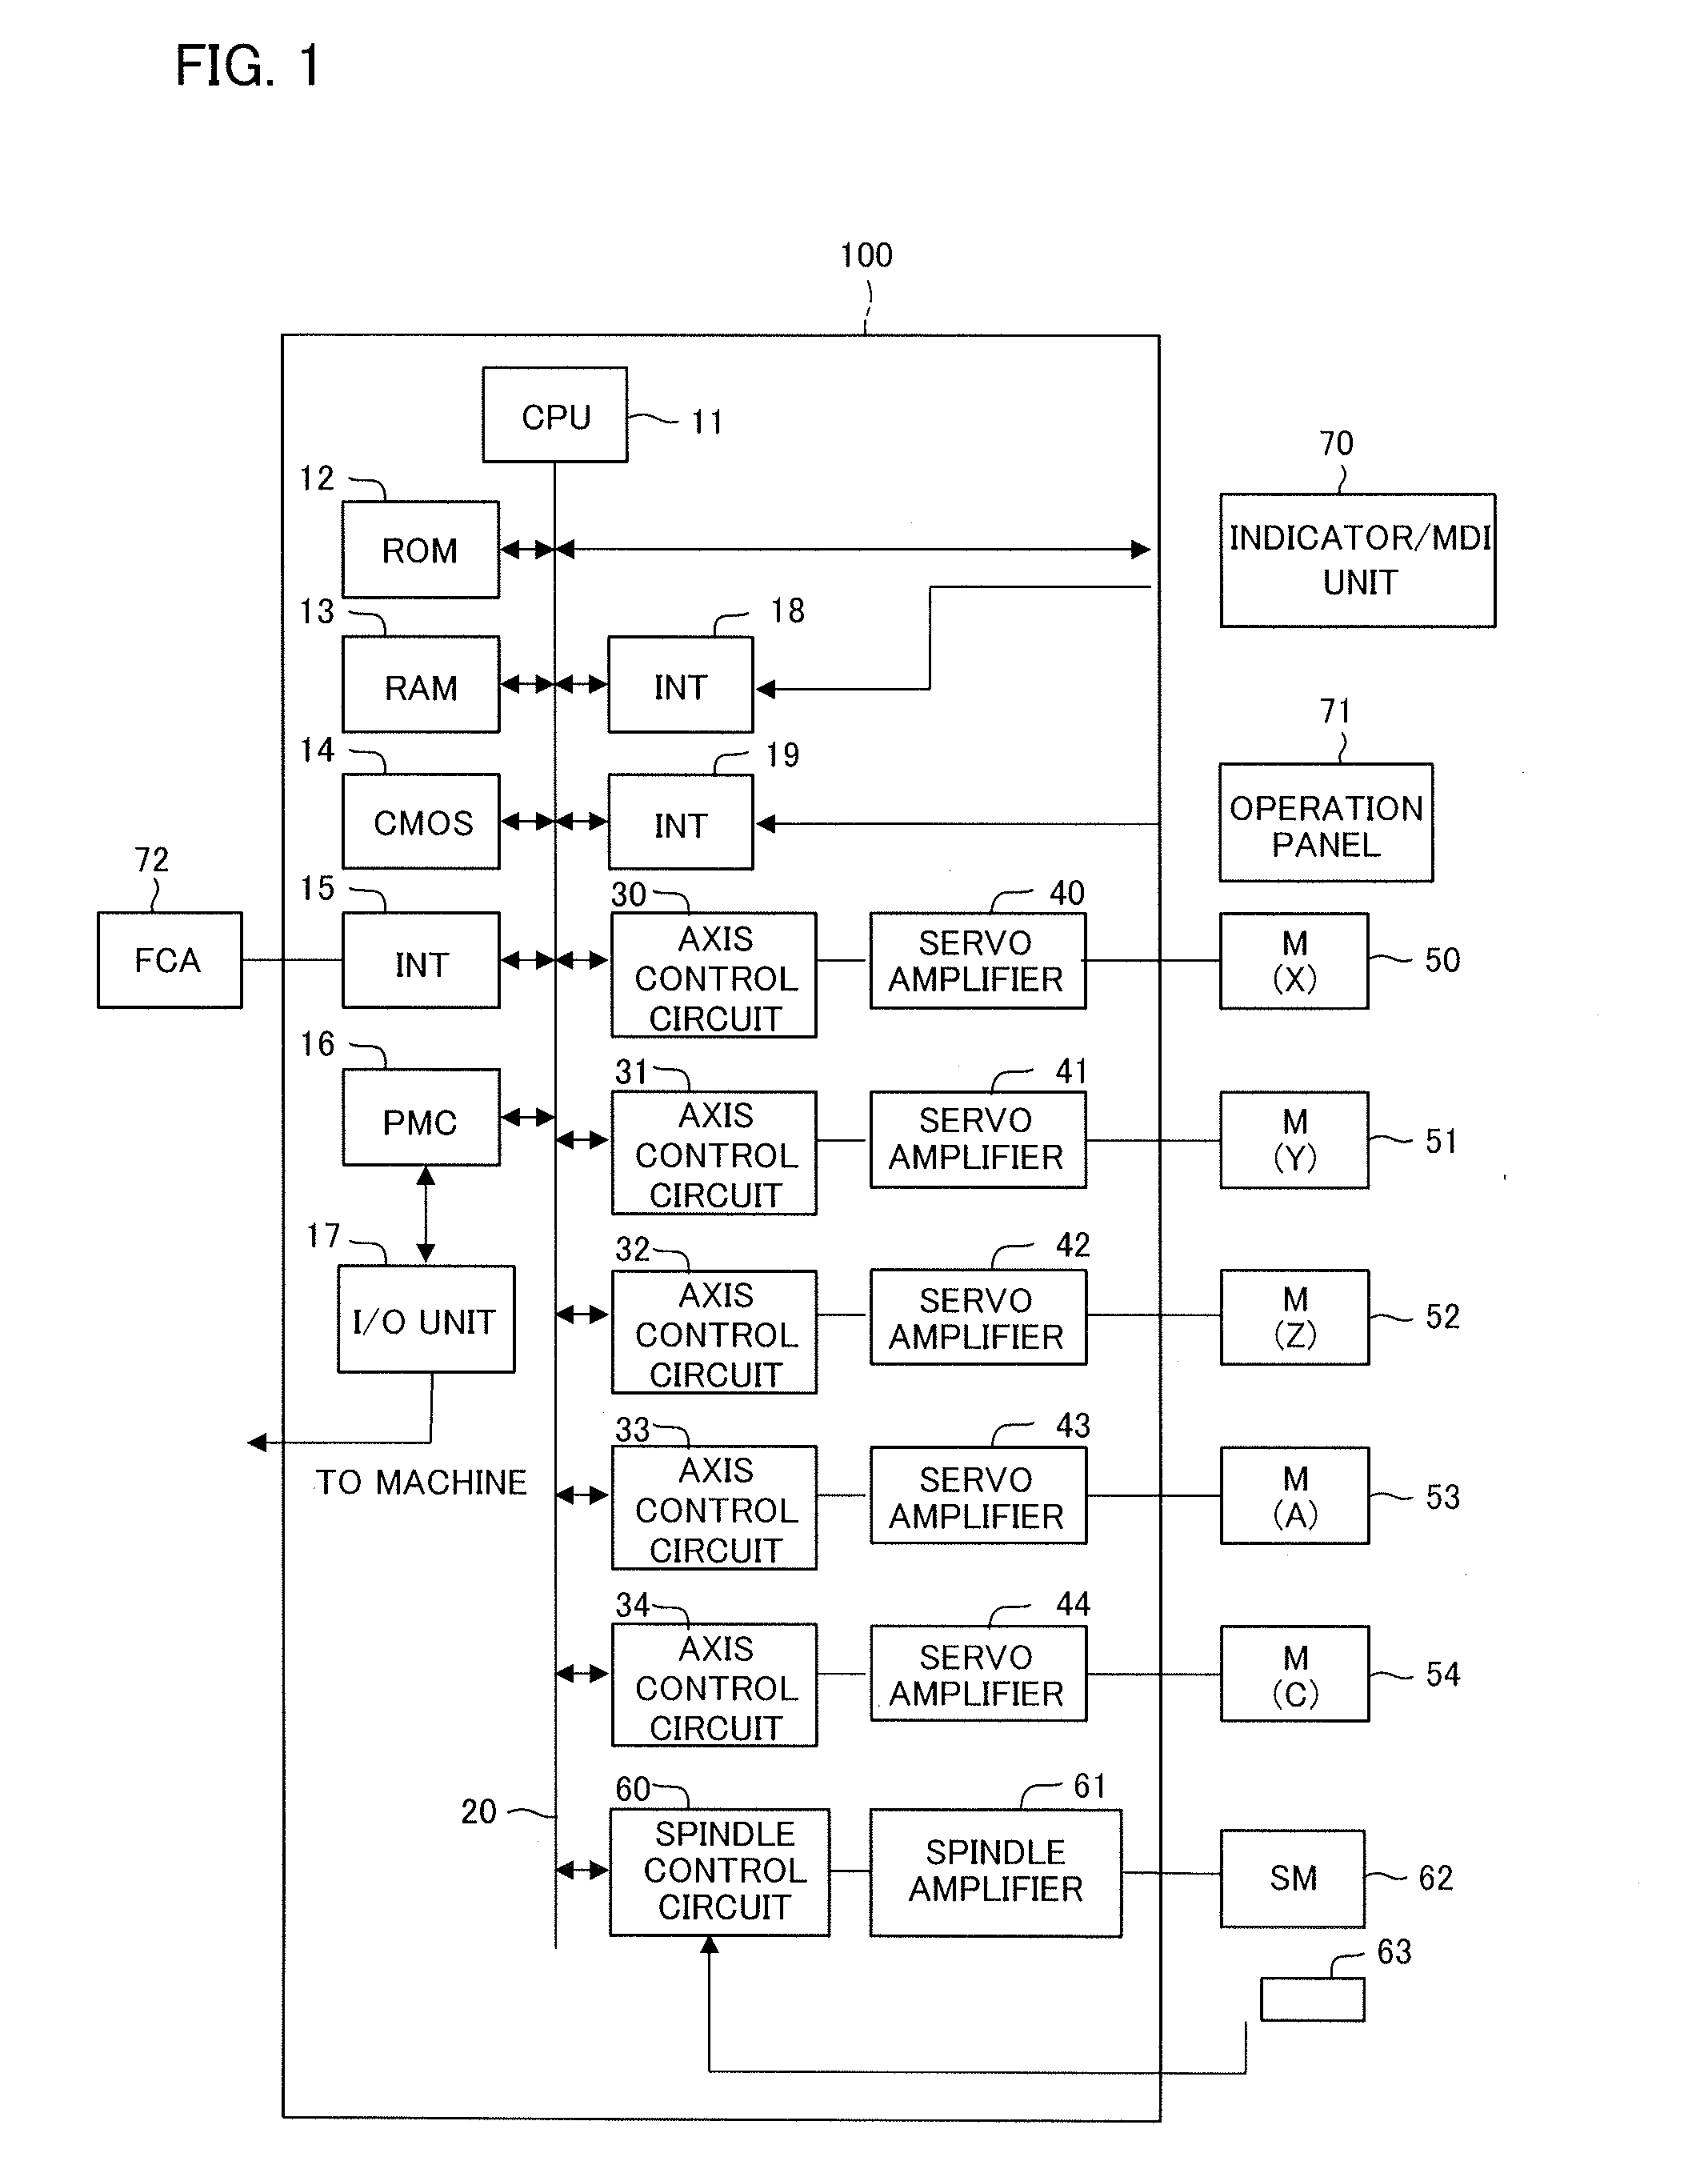 Numerical controller having tool tip point control function